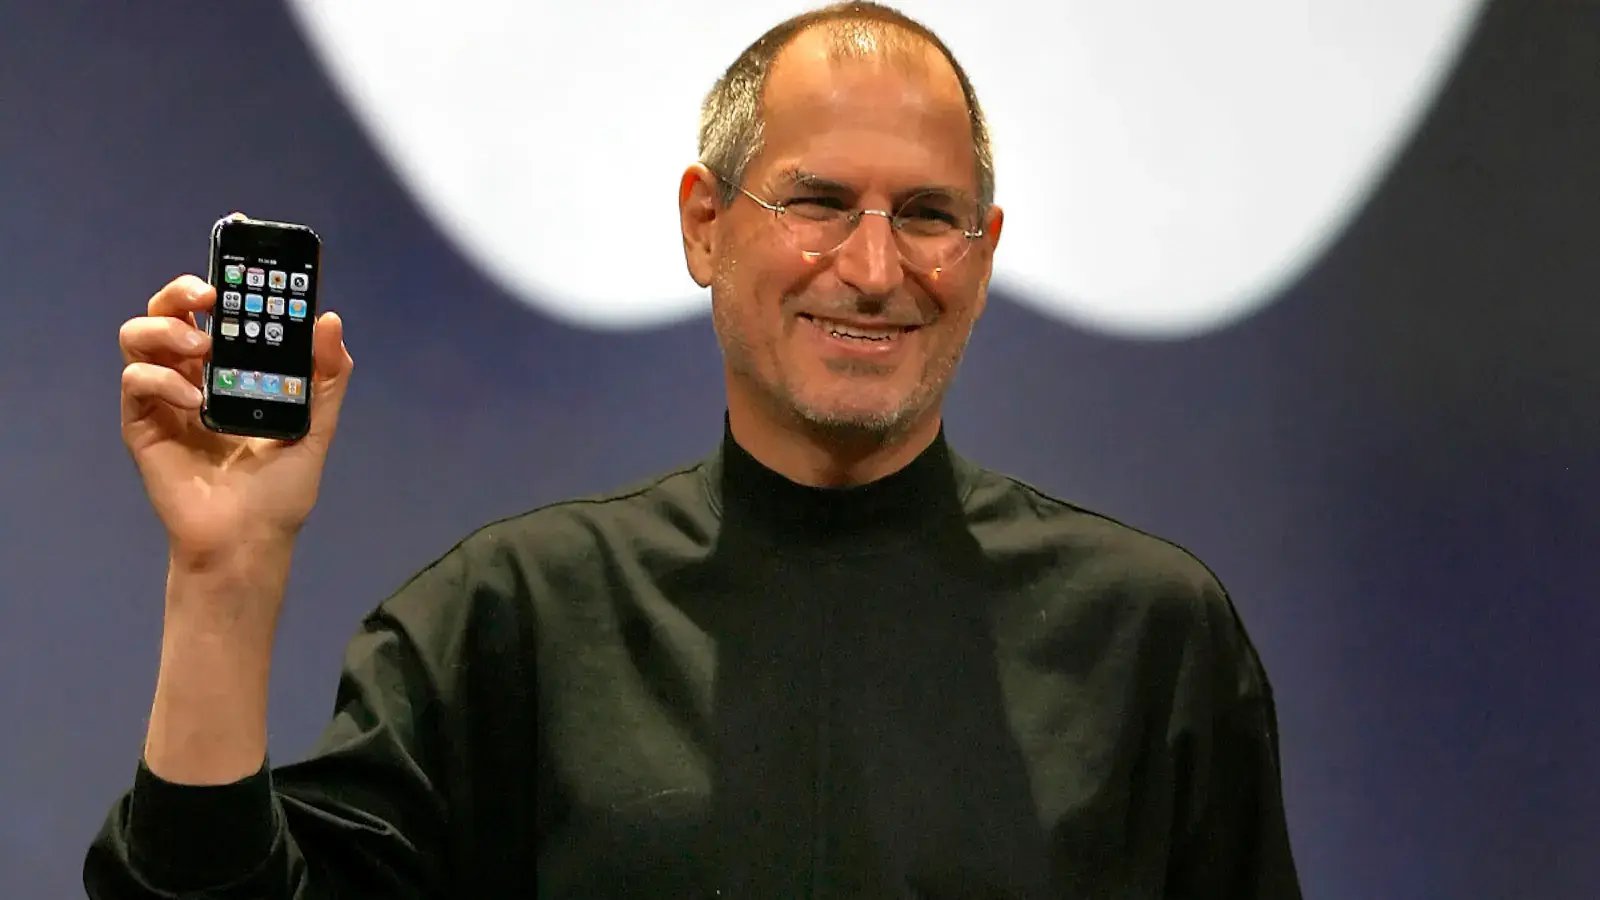 Famous People With Autism Spectrum Disorder - Steve Jobs - American Business Magnate/Founder of Apple Inc.